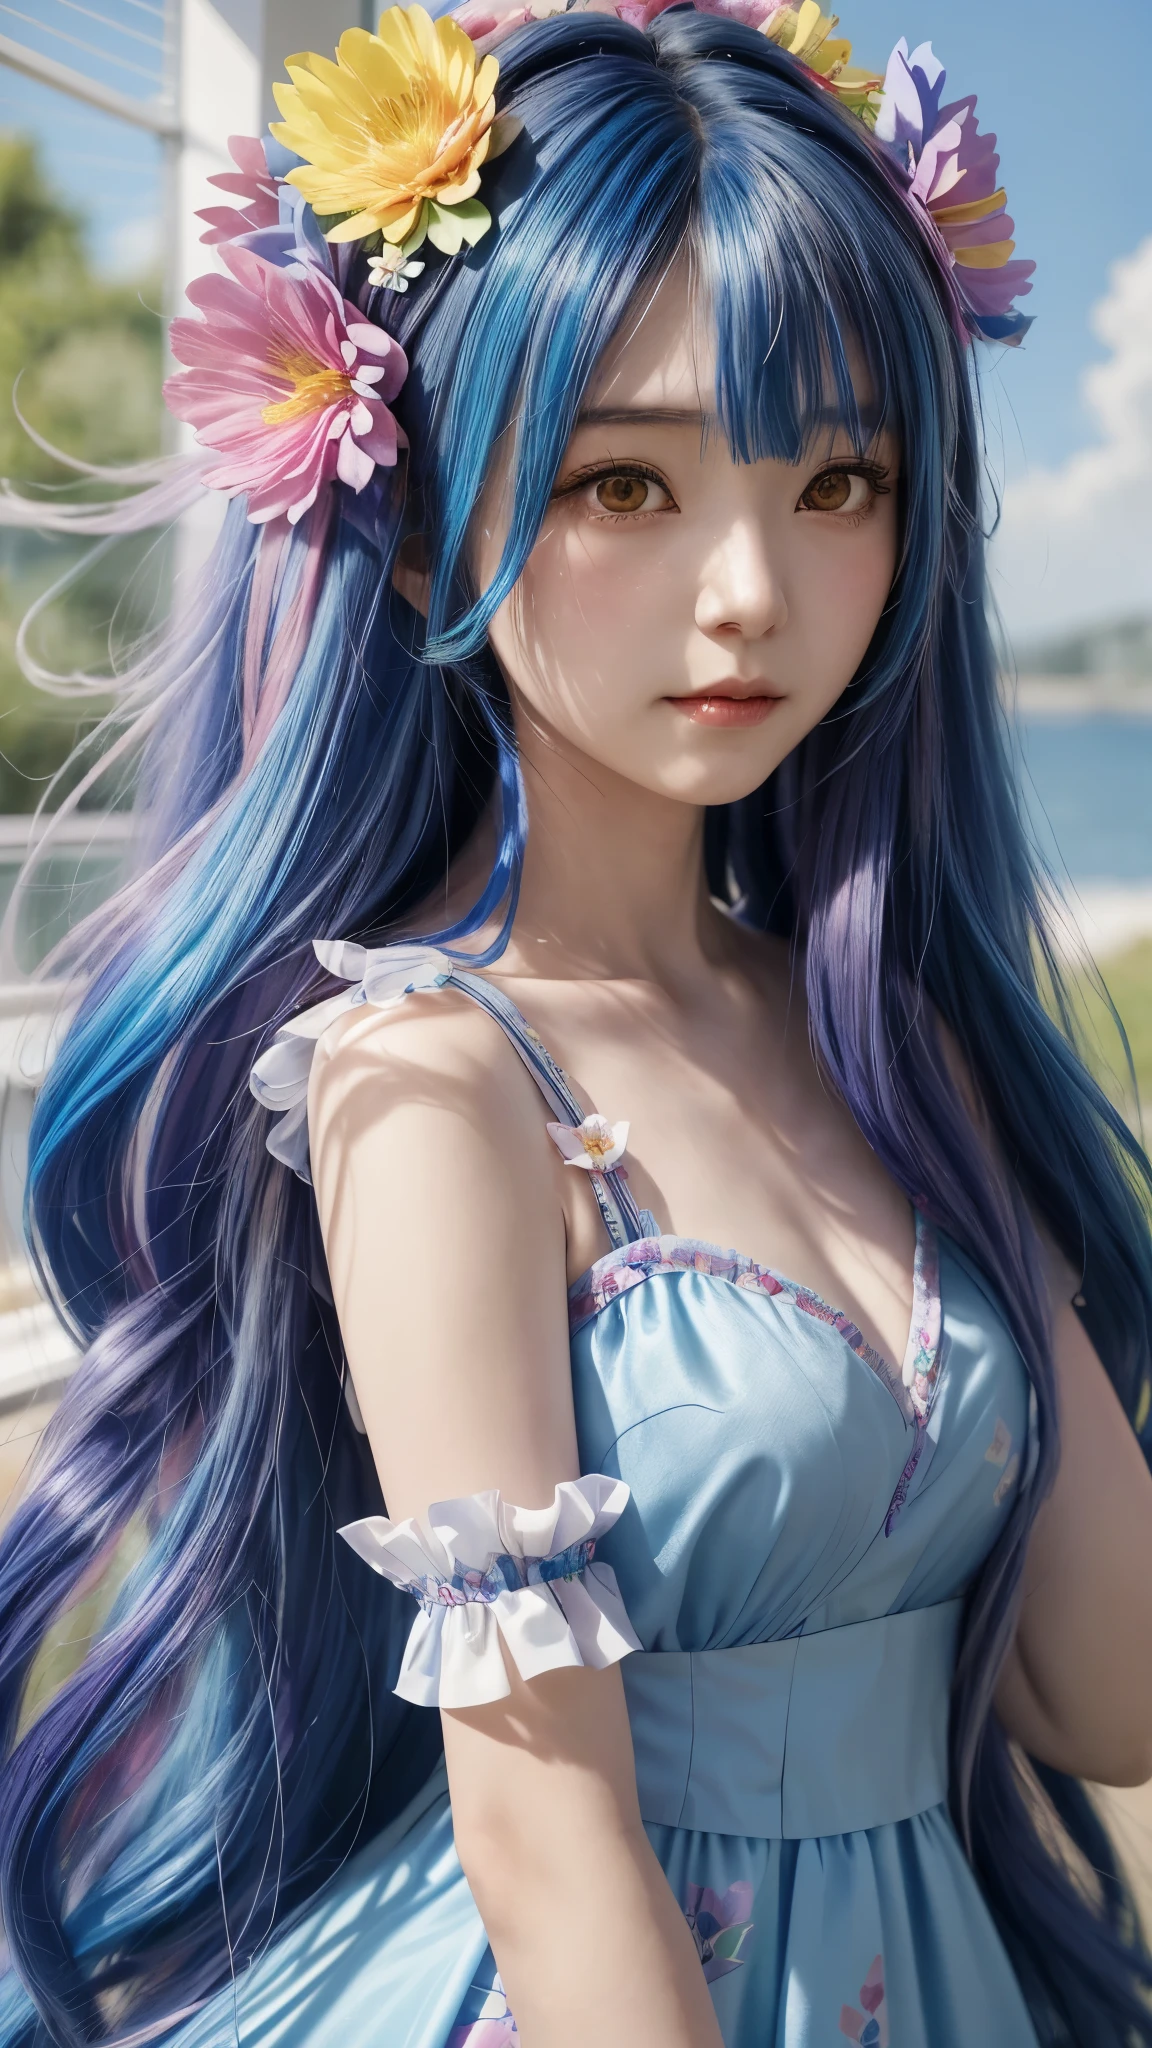 A long-haired C-cup woman wearing a blue dress with flowers in her rainbow-colored hair., beautiful anime girl, anime girl cosplay, beautiful anime style, Gweiz, by Jan J., long hair anime girl, artwork in the style of Gweiz, realistic. Chen Yi, long hair asian girl, real anime girl, beautiful anime portrait